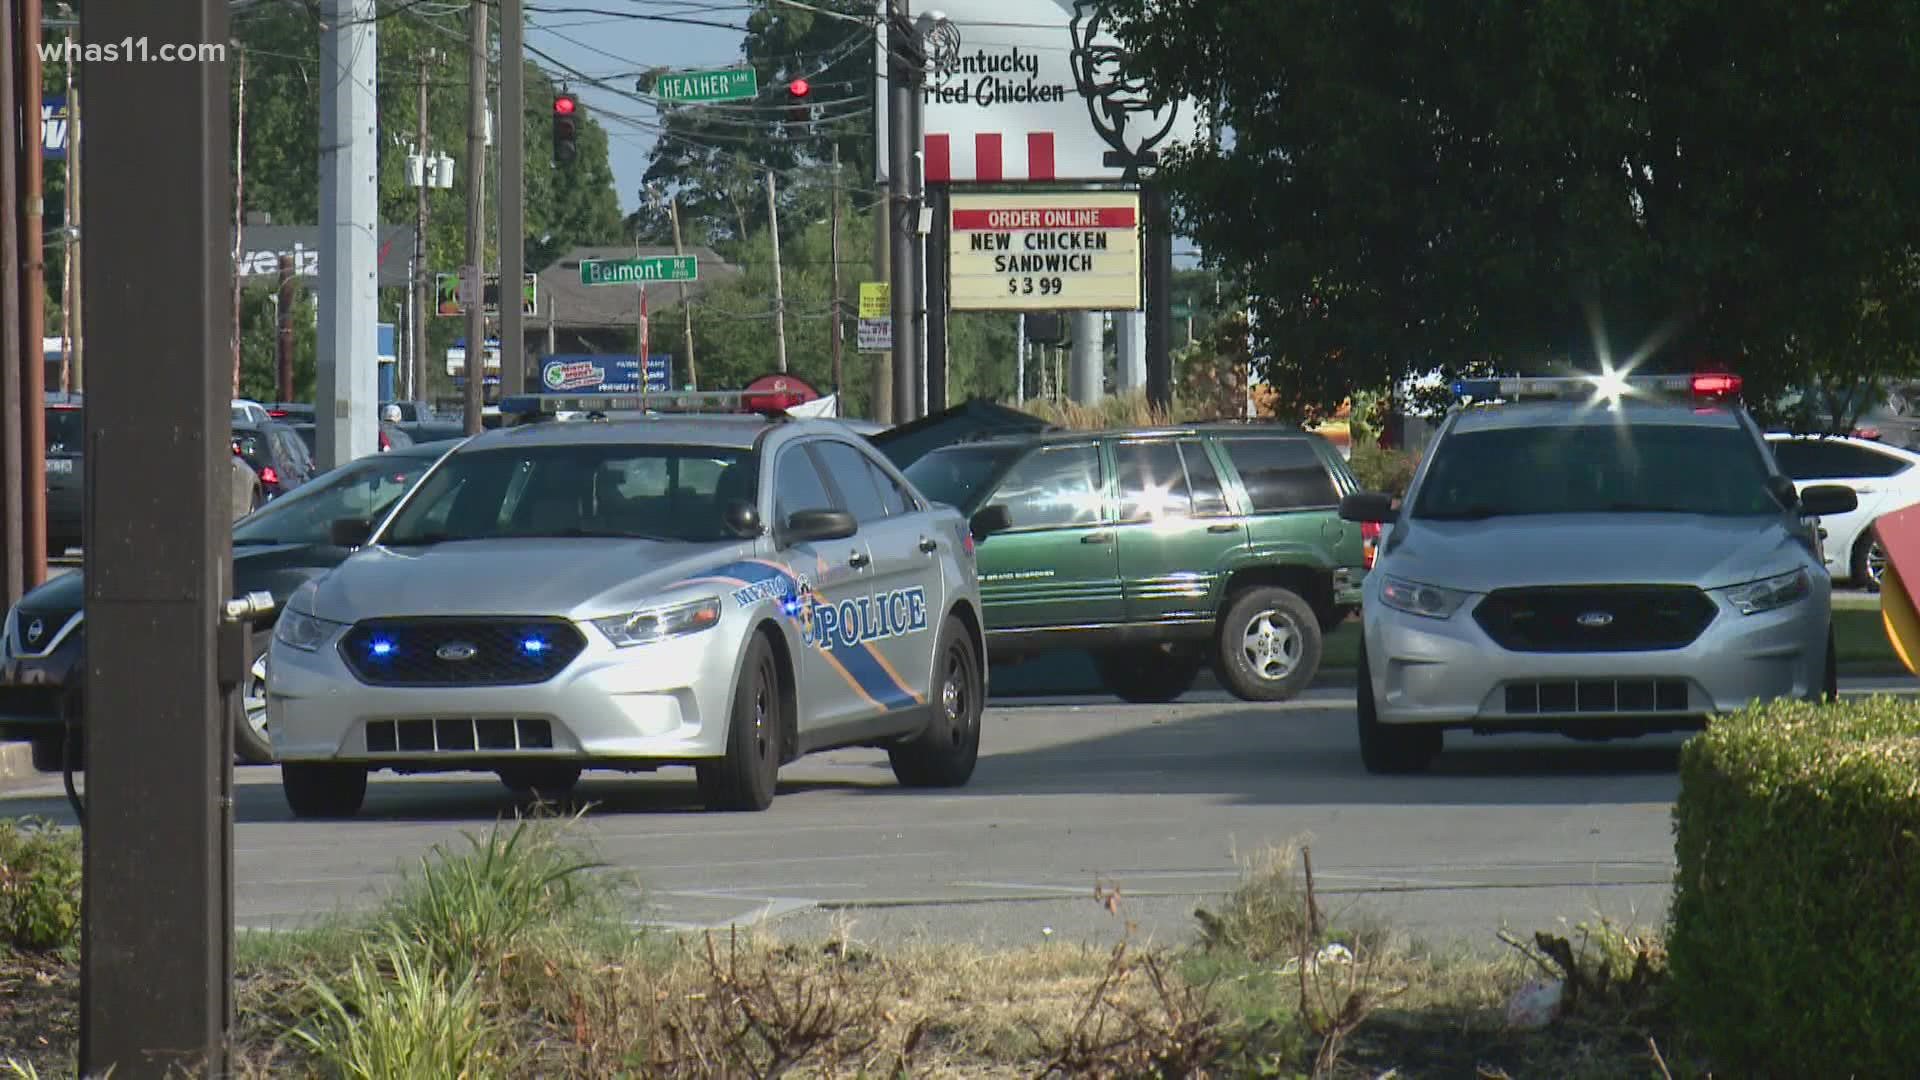 LMPD Man shoots self while pulling gun to shoot McDonalds customer after fight whas11